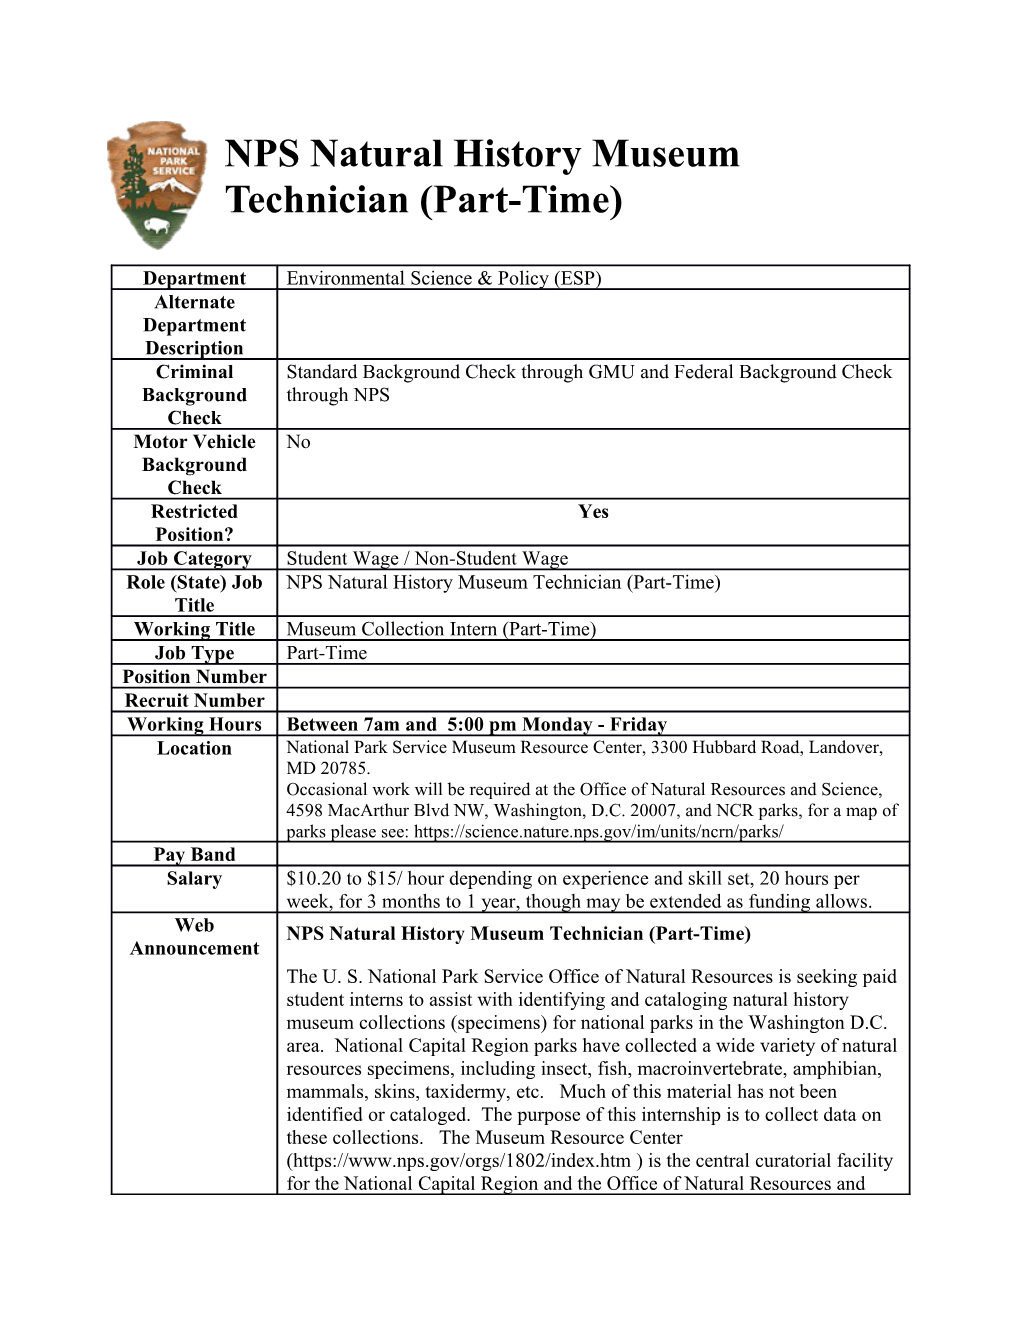 NPS Natural History Museum Technician(Part-Time)